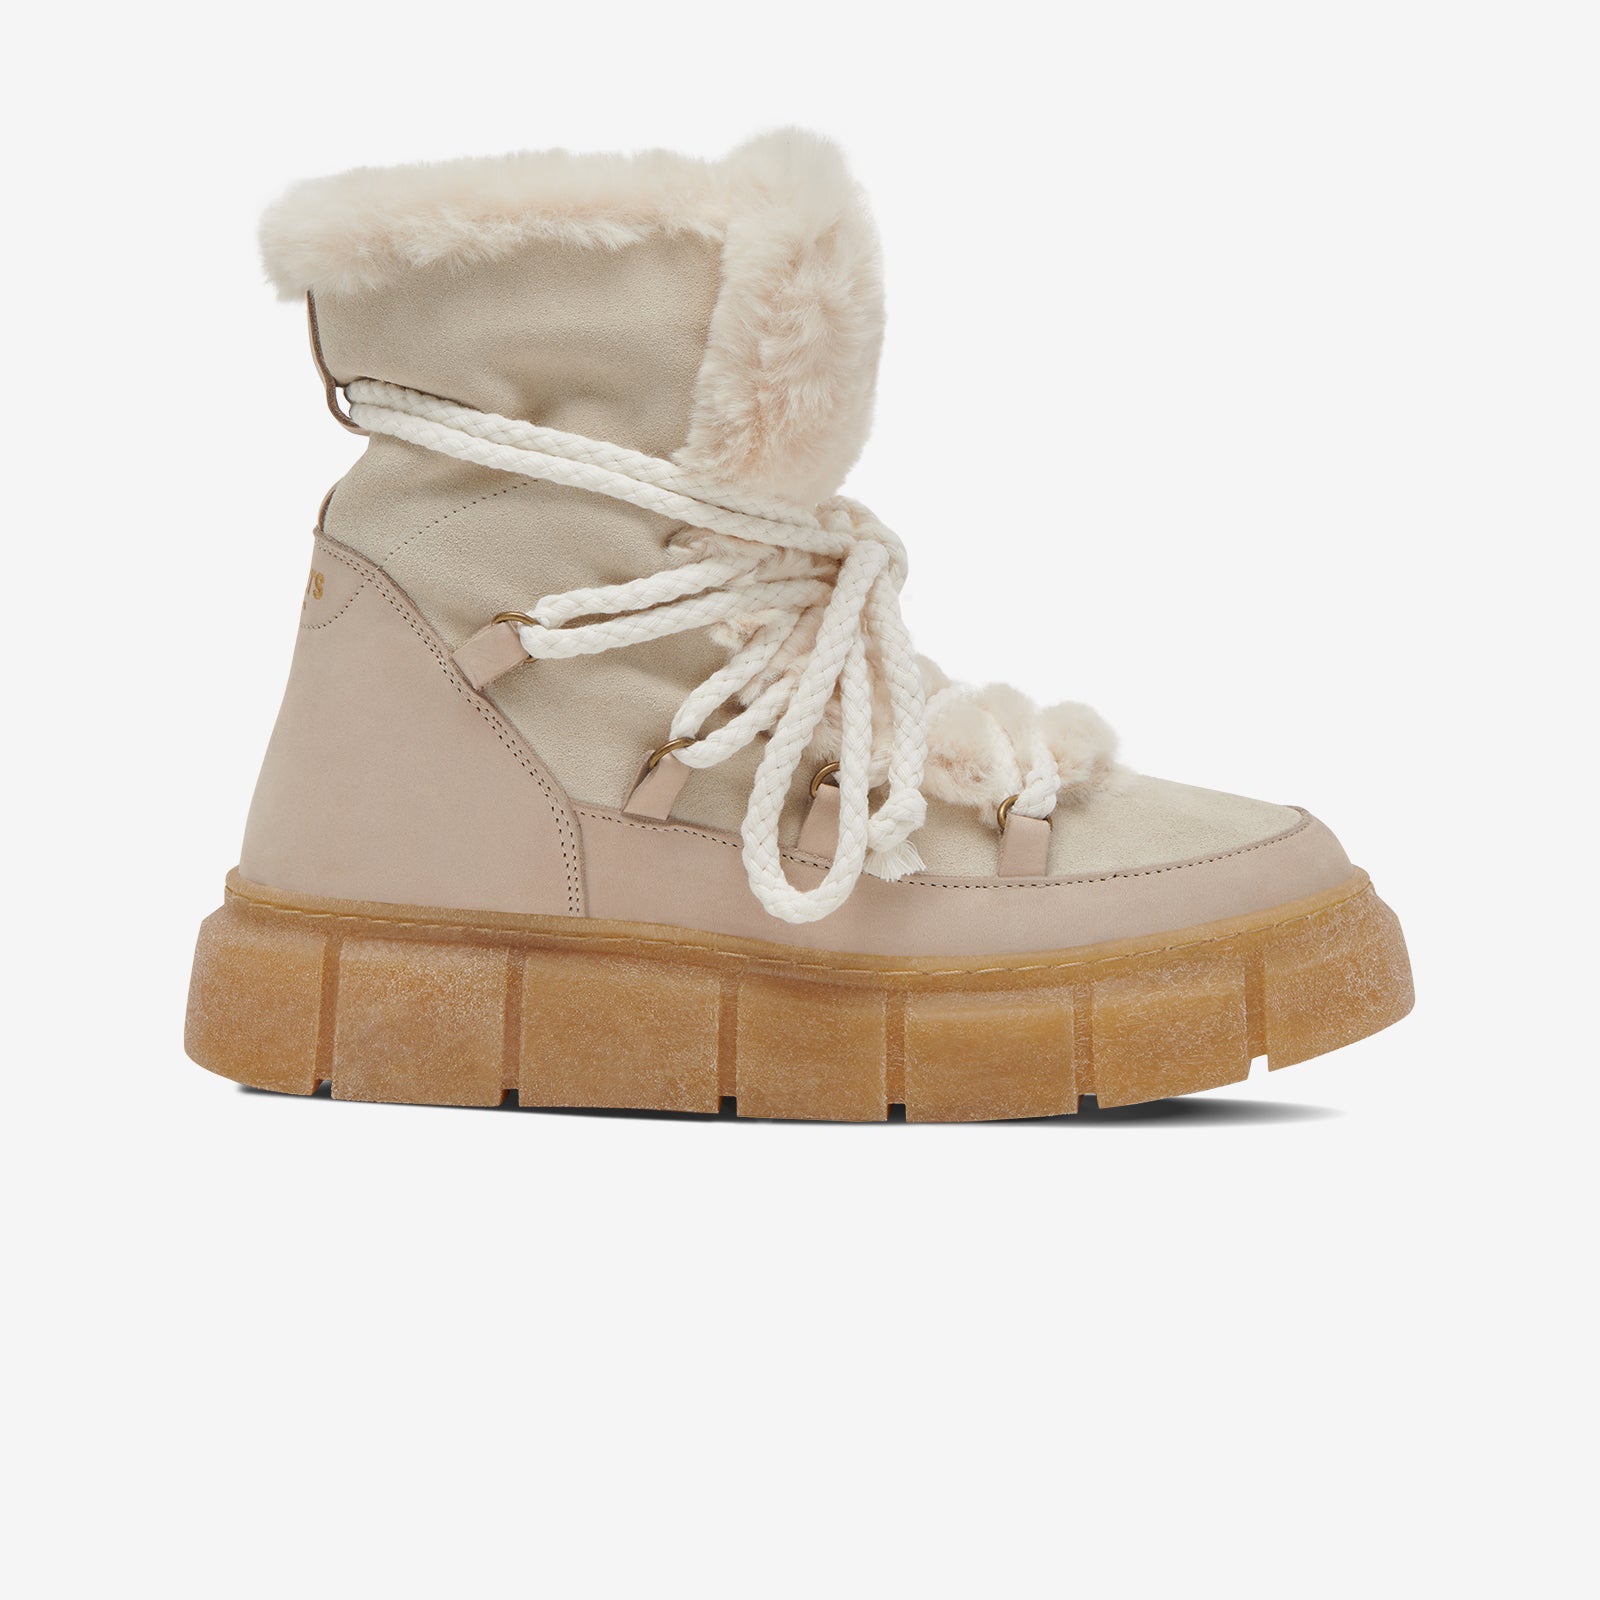 GREATS - The Madison Boot - Sand - Women's Shoe